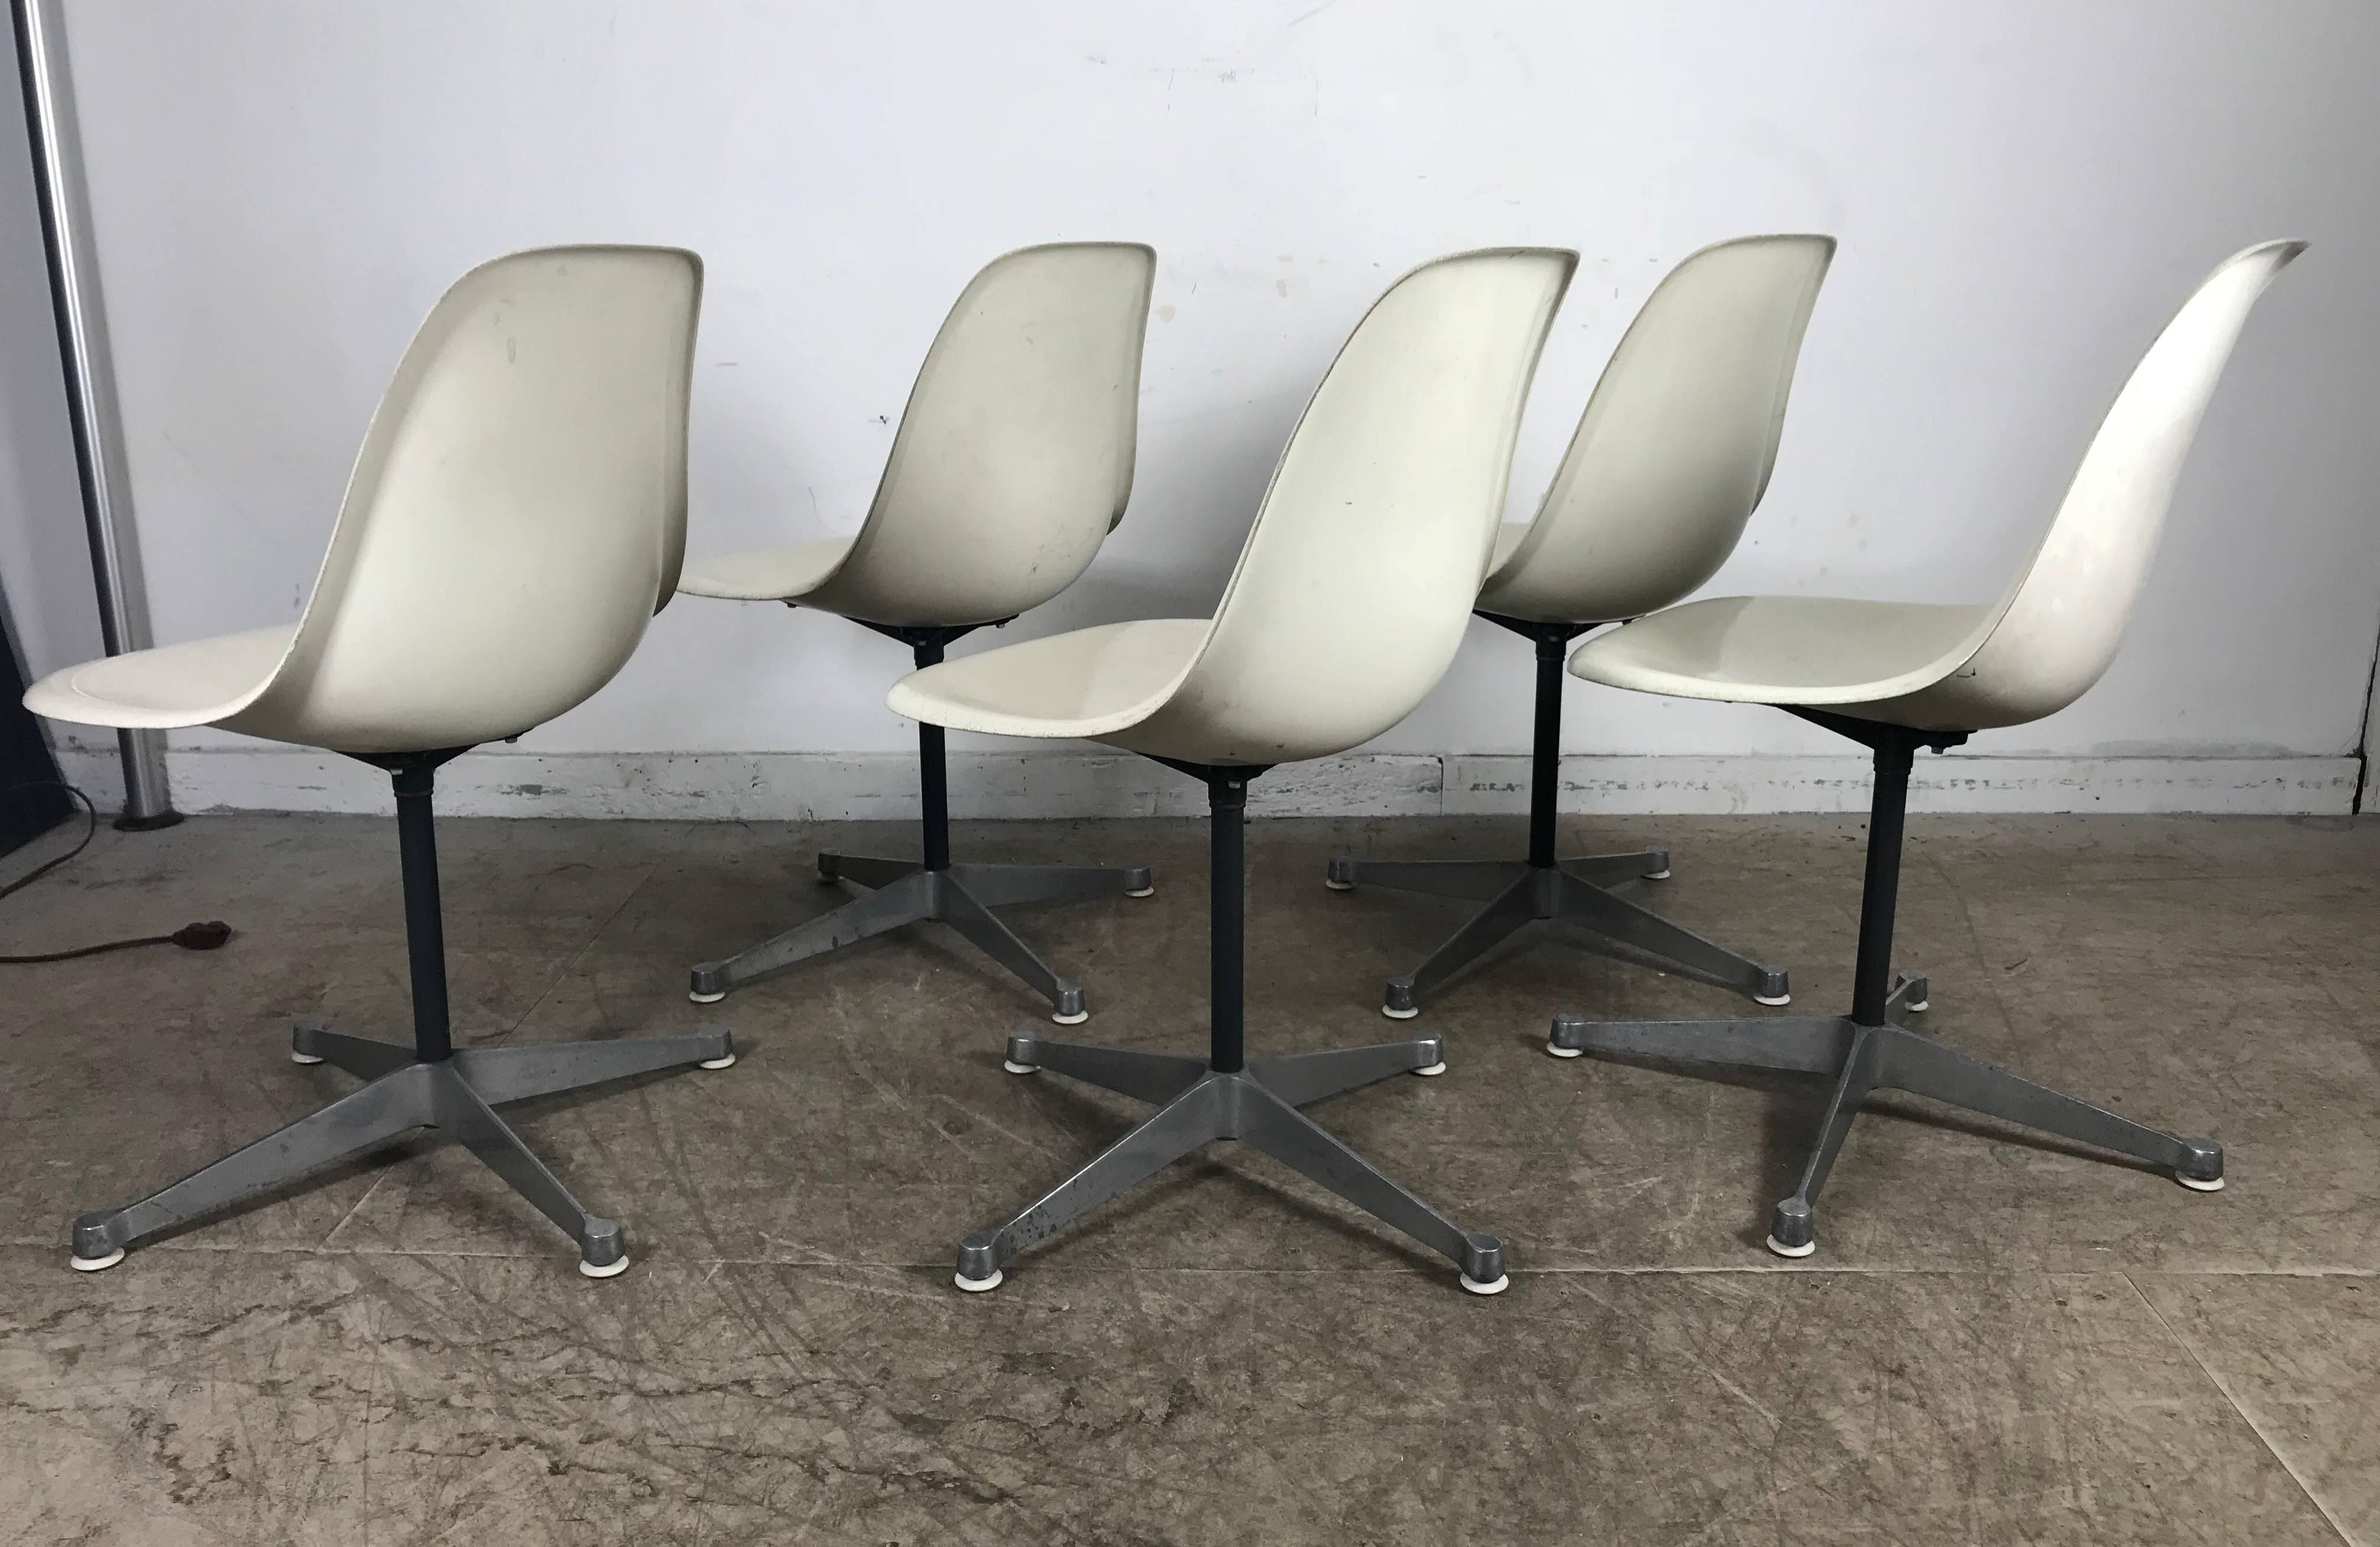 Six Classic Fiberglass Swivel Side Shell Chairs Charles Eames, Herman Miller In Good Condition For Sale In Buffalo, NY